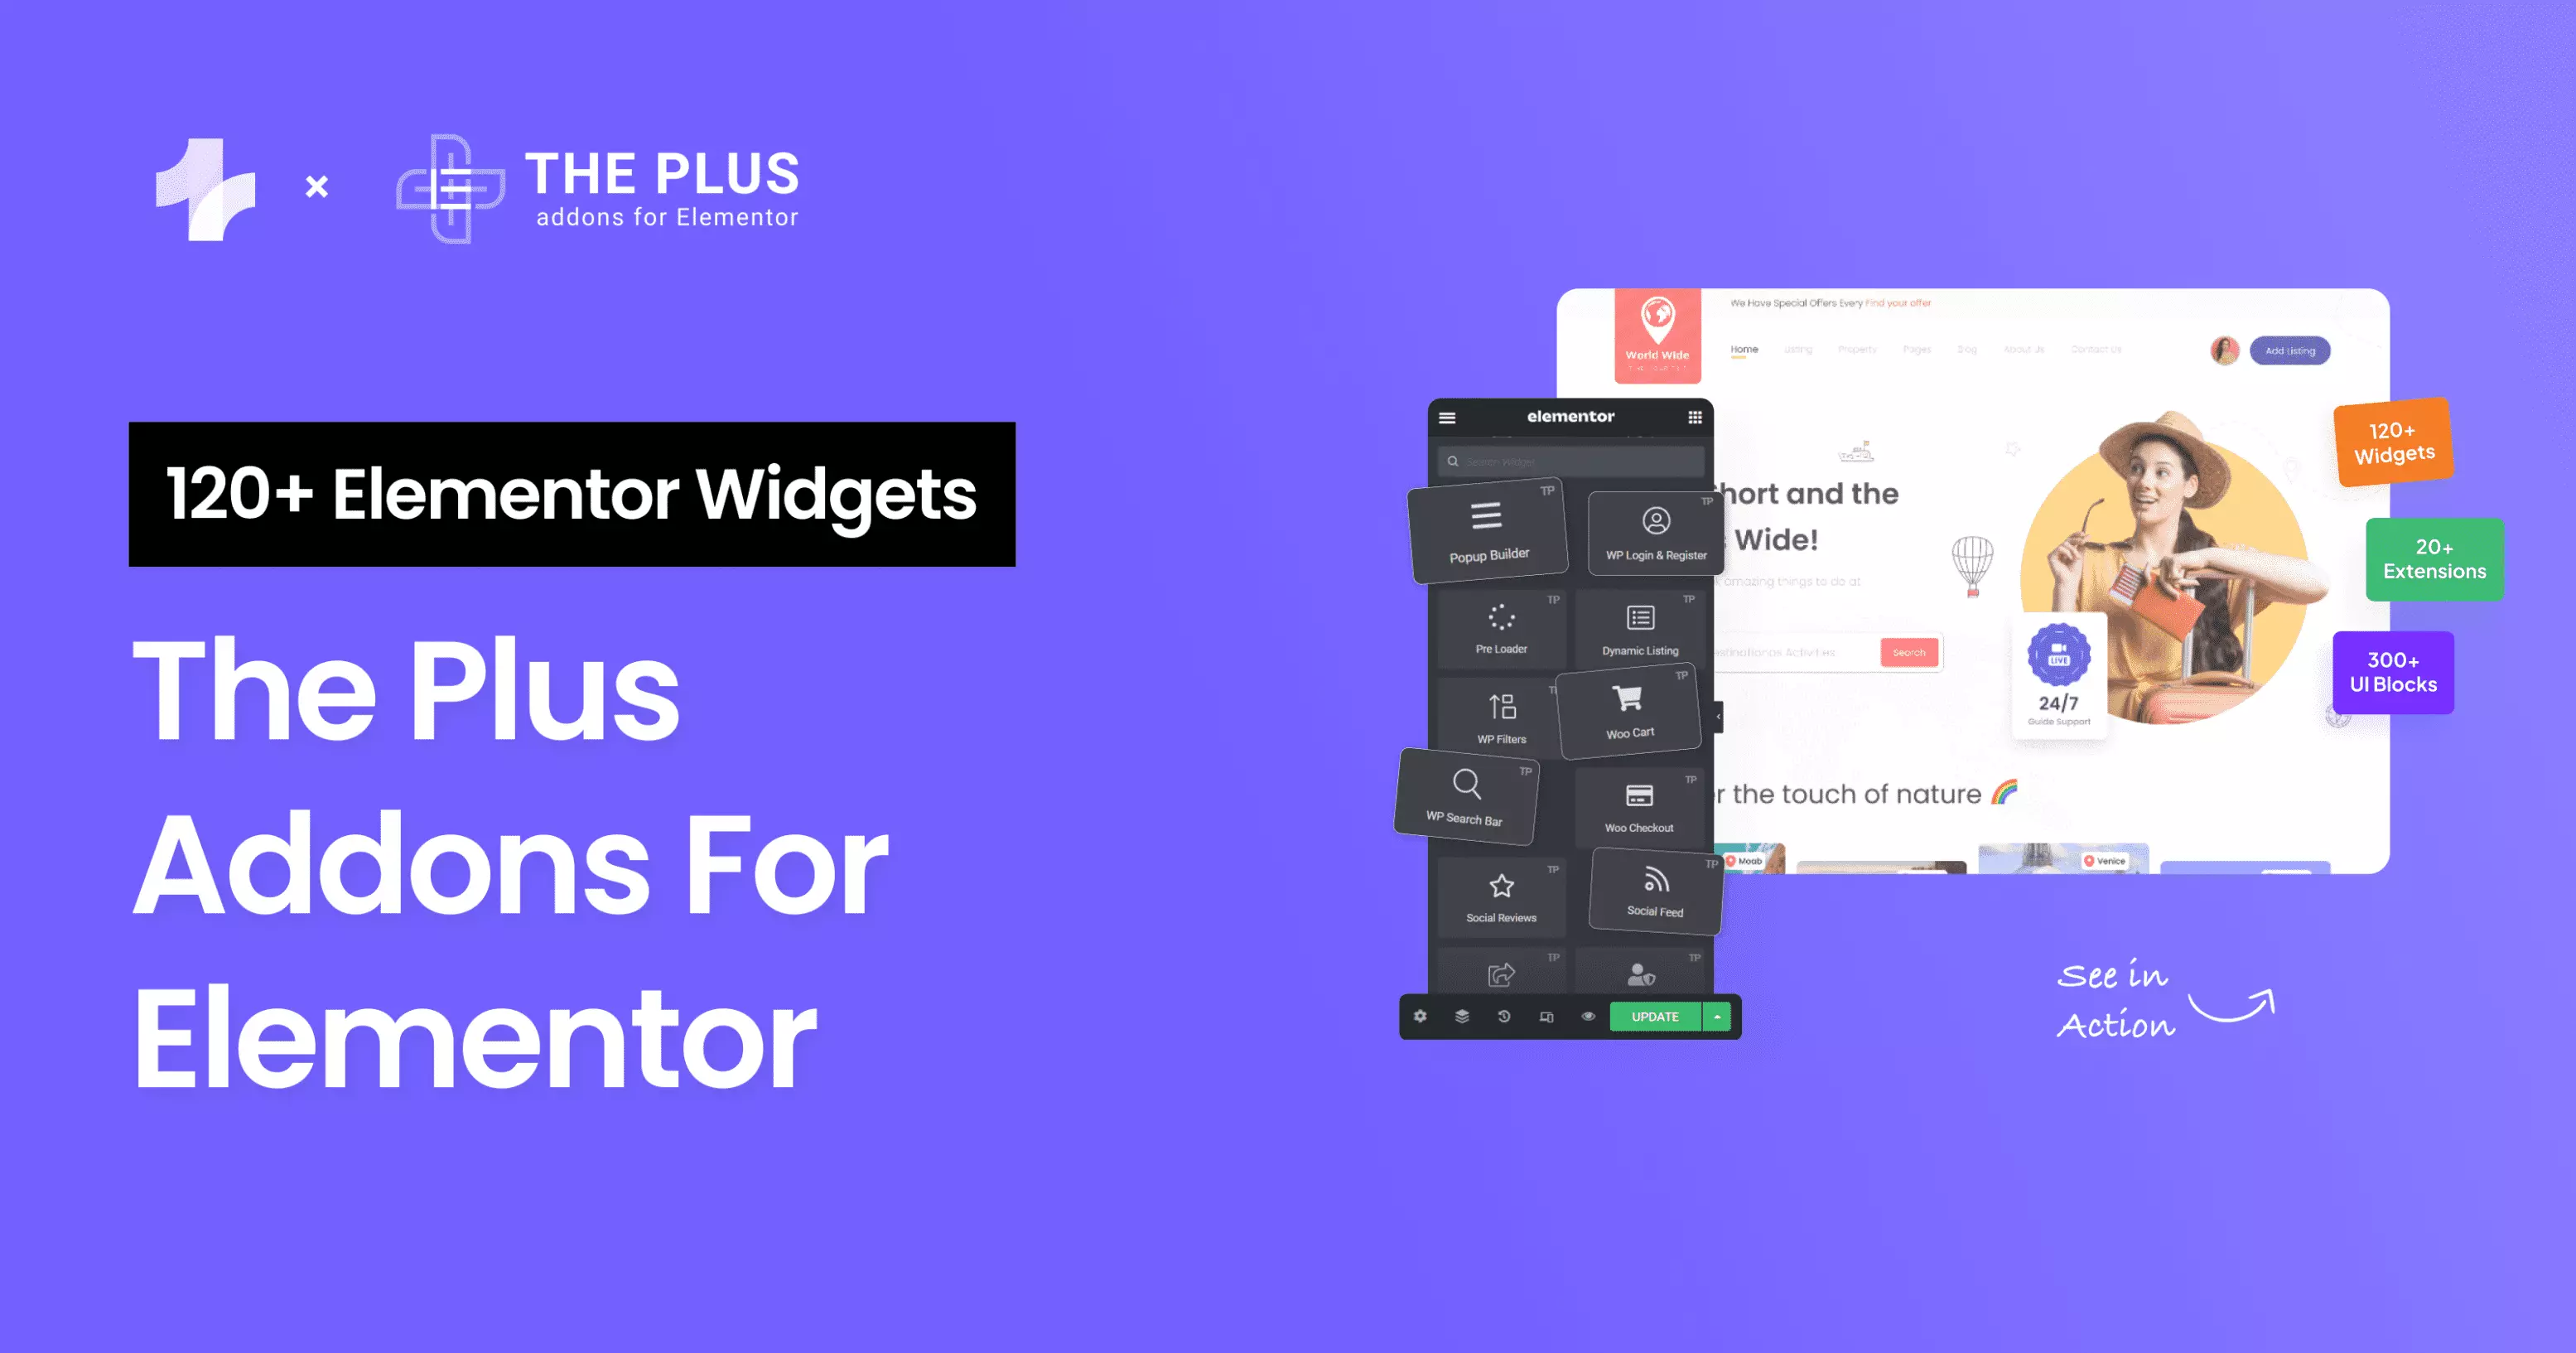 The Plus Addons For Elementor The Plus Addons for Elementor